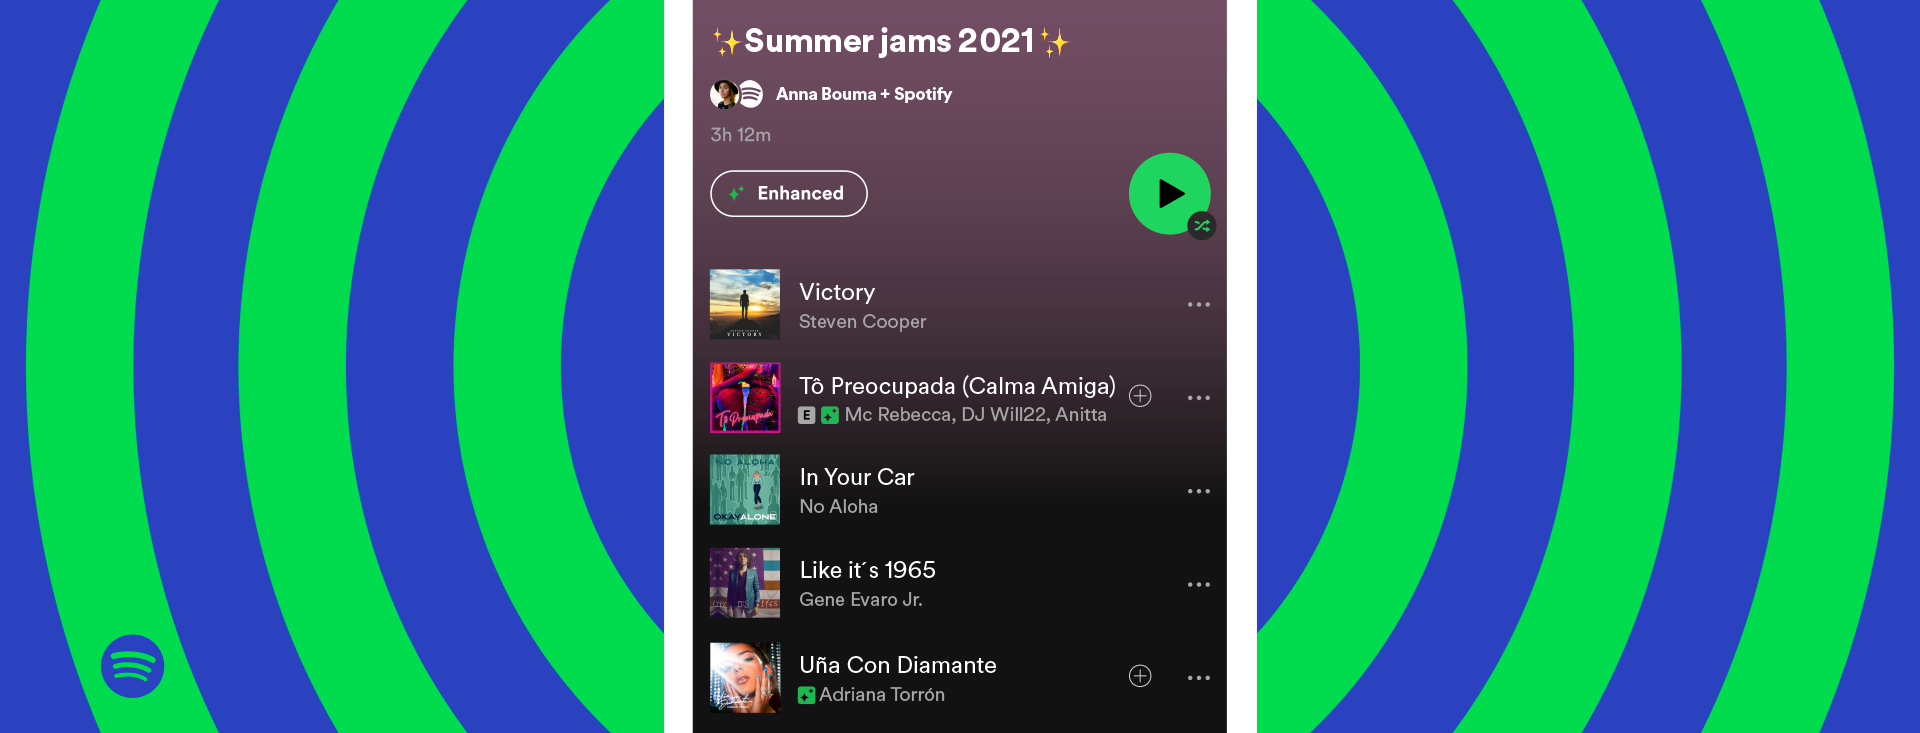 New Spotify Enhance song recommendation feature will make your playlists perfect